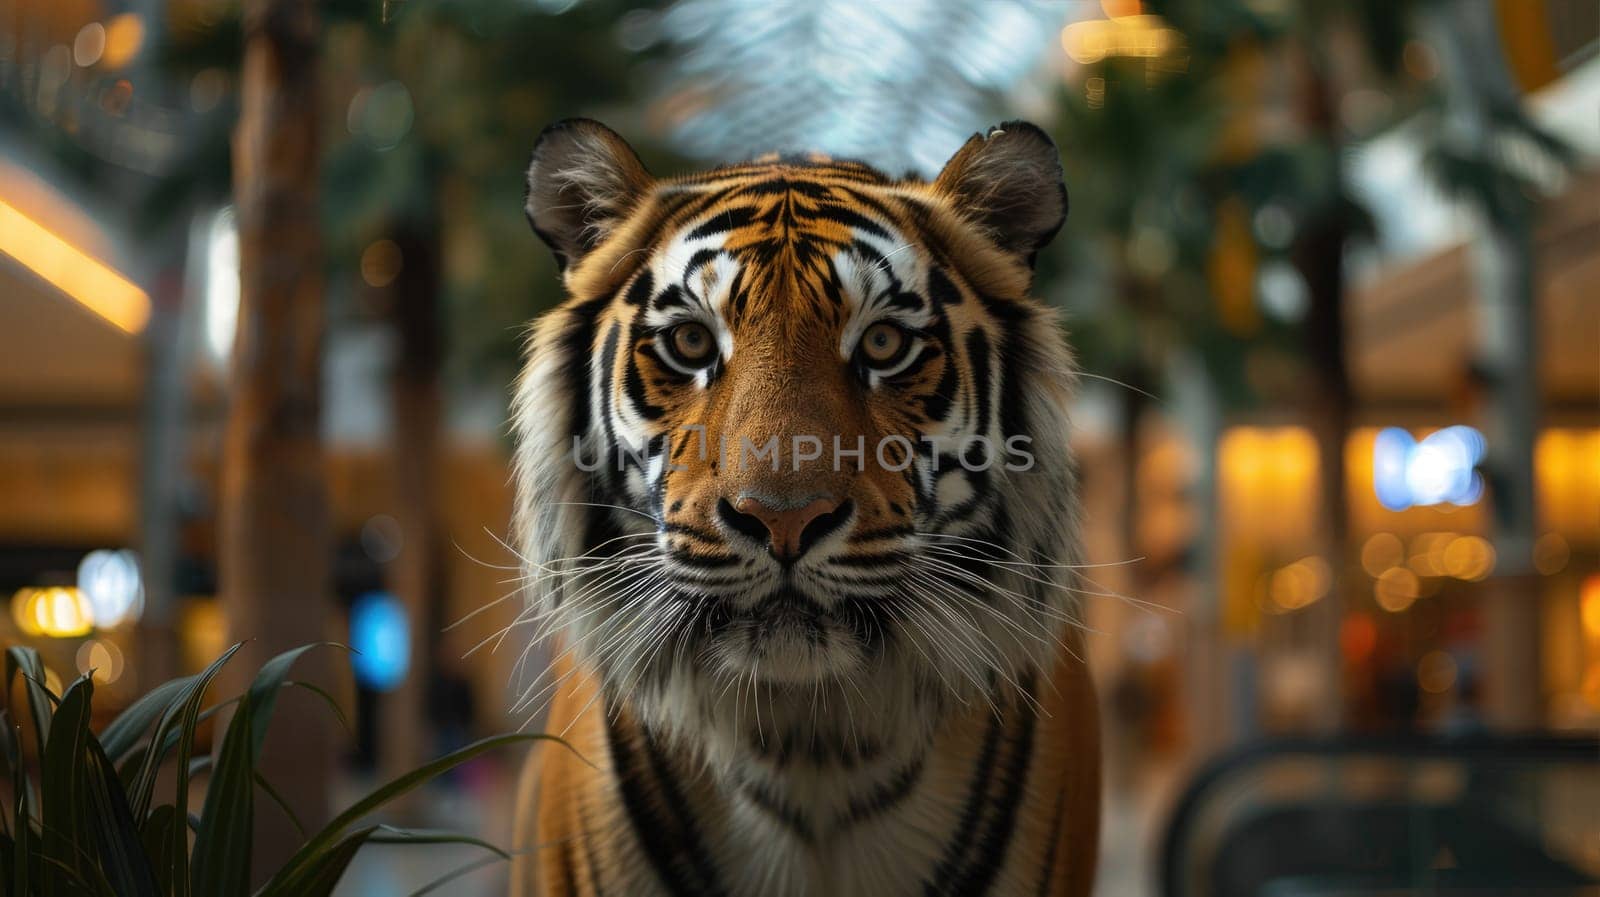 Bengal tiger with whiskers roaming mall AI